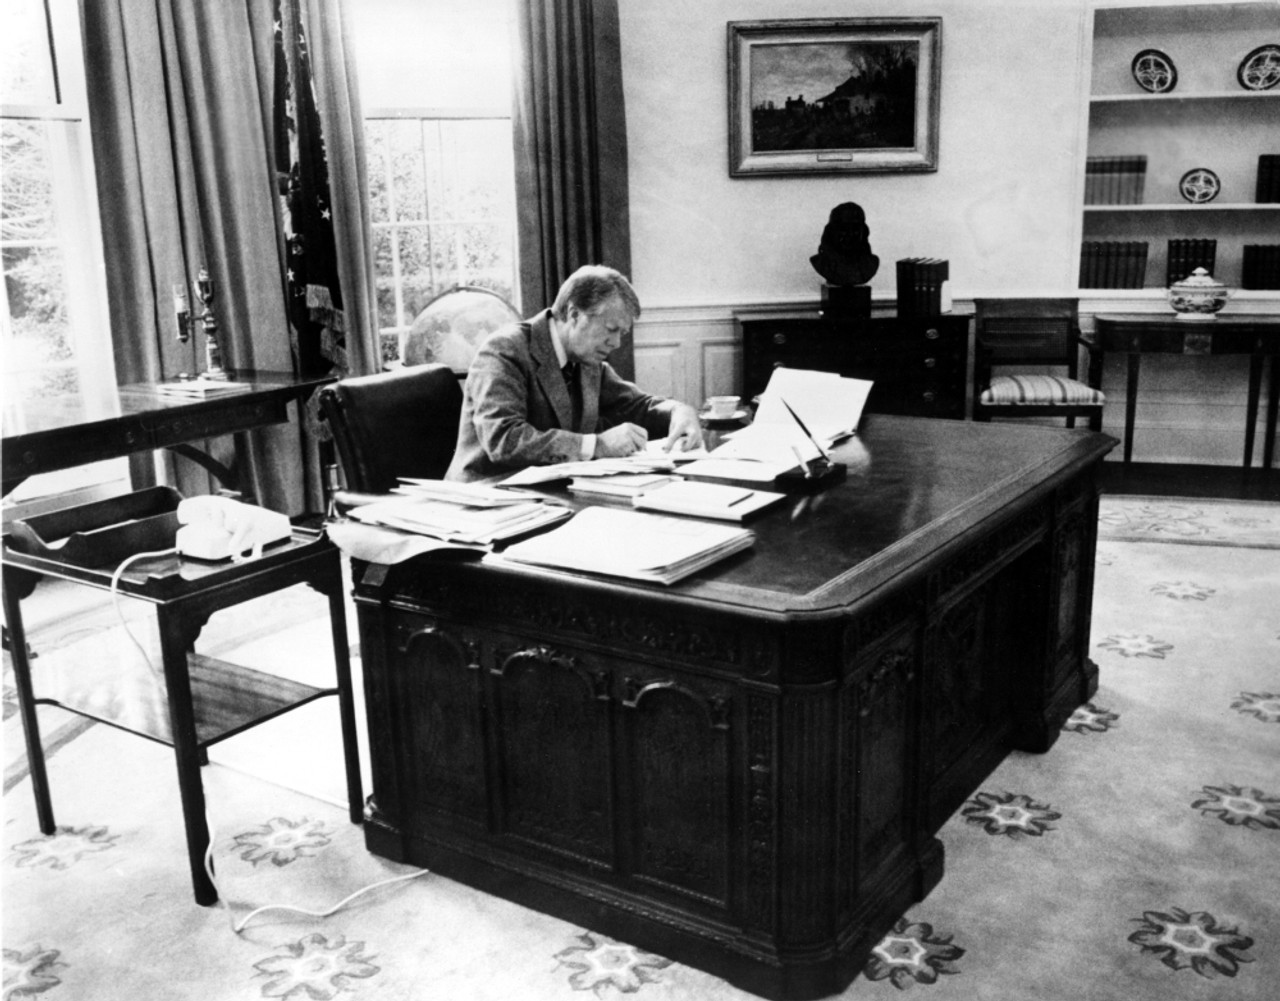 President Jimmy Carter At Work In The Oval Office Of The White House  History - Item # VAREVCPBDJICACS002 - Posterazzi